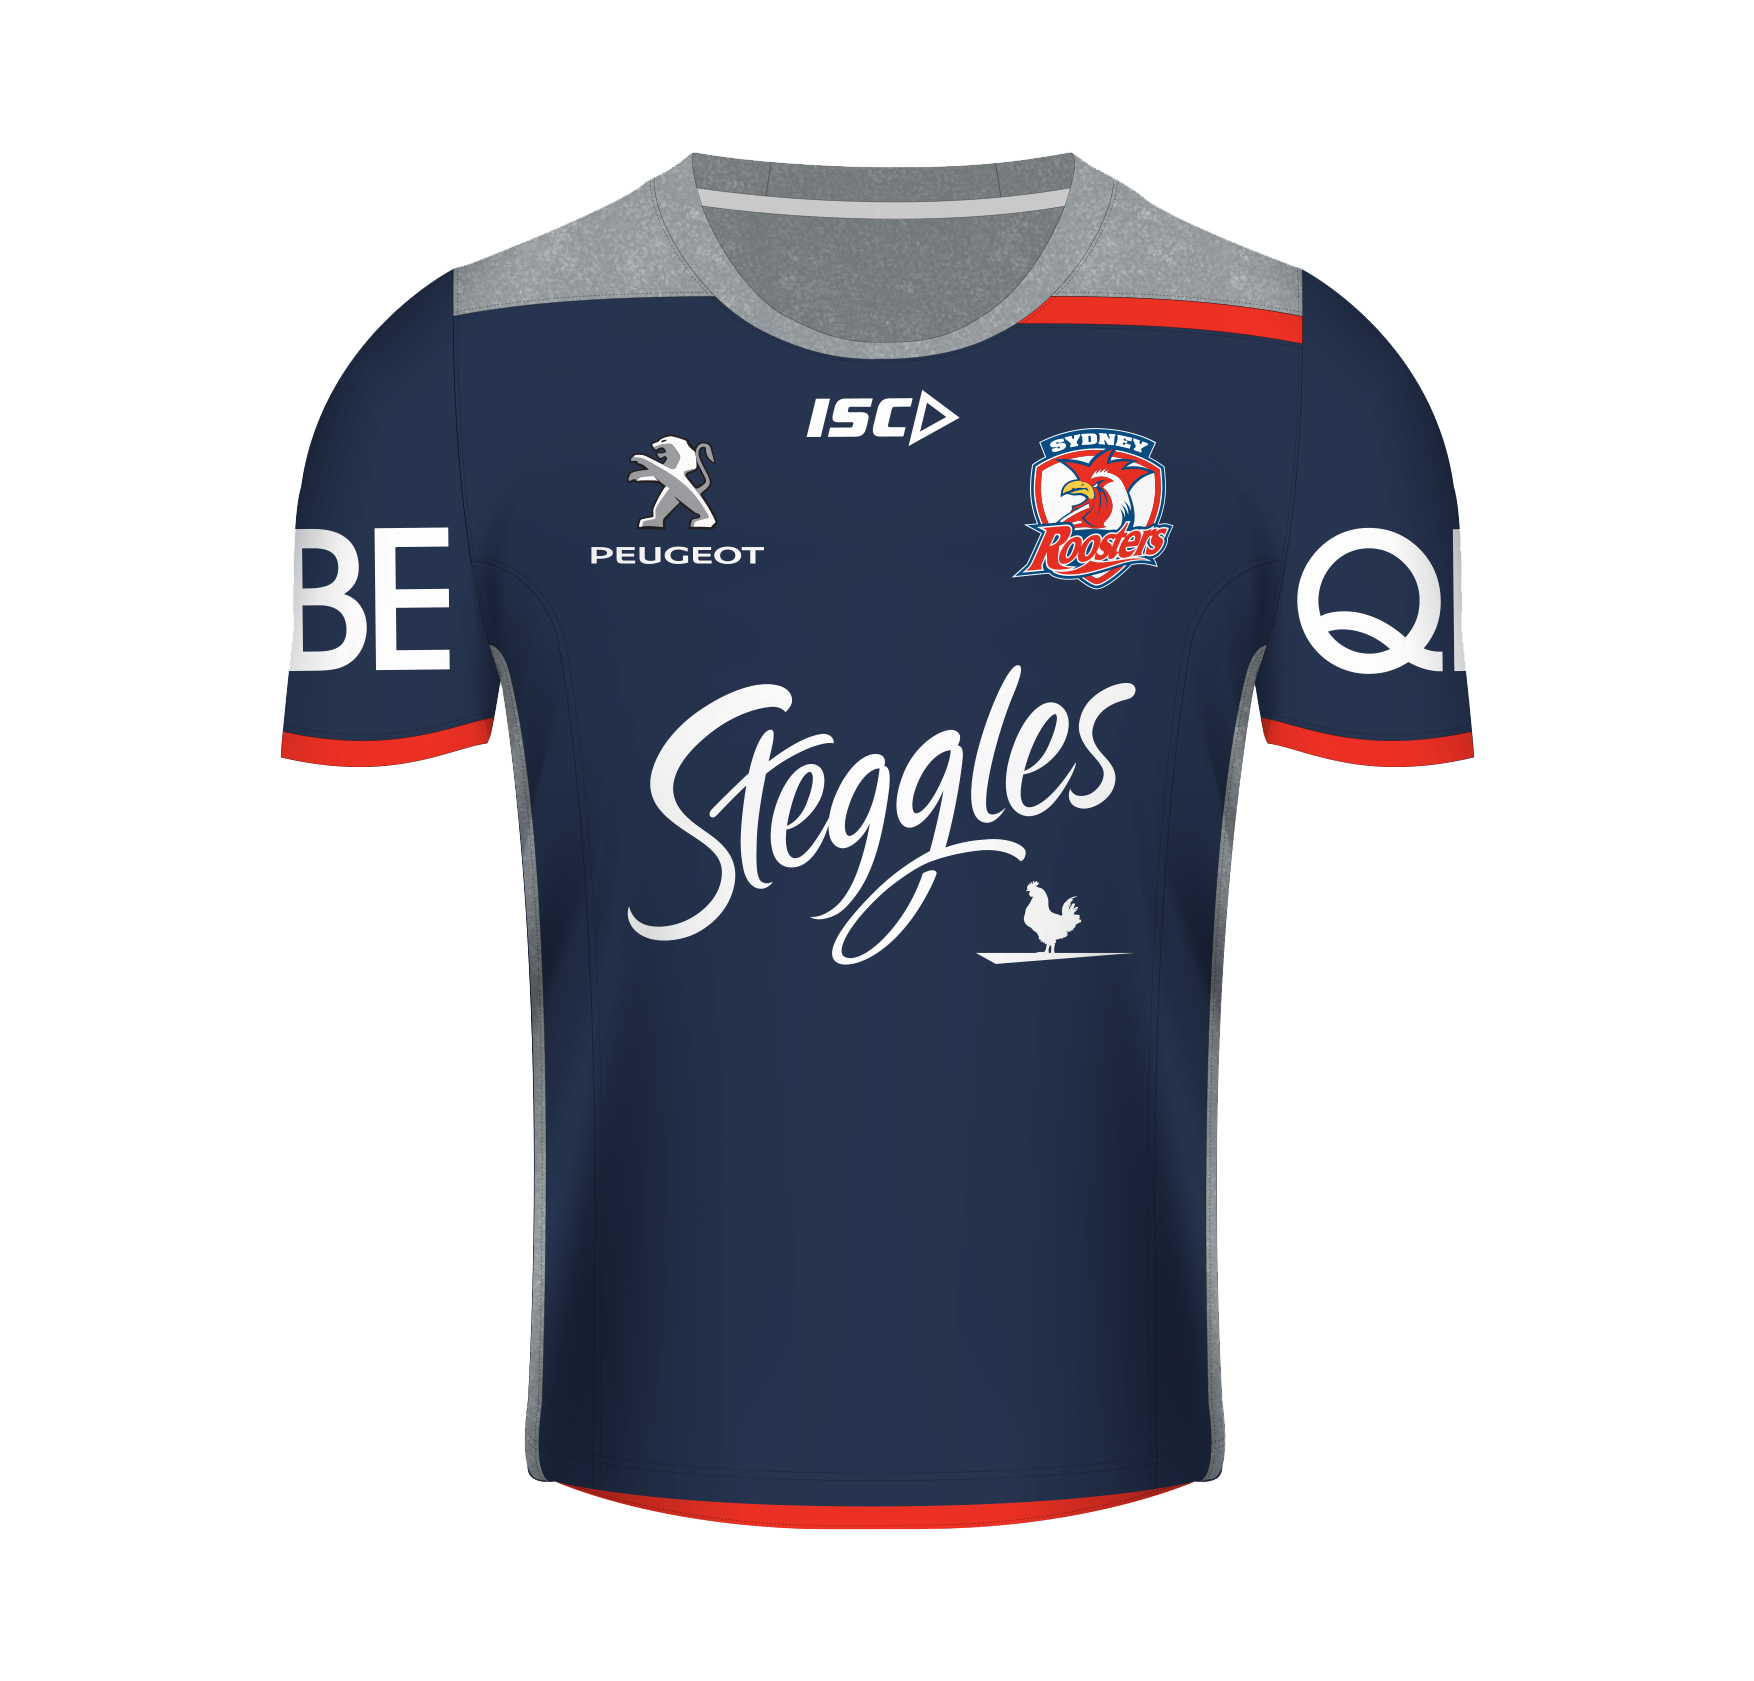 ISC NRL Sydney Roosters T-Shirt Navy 